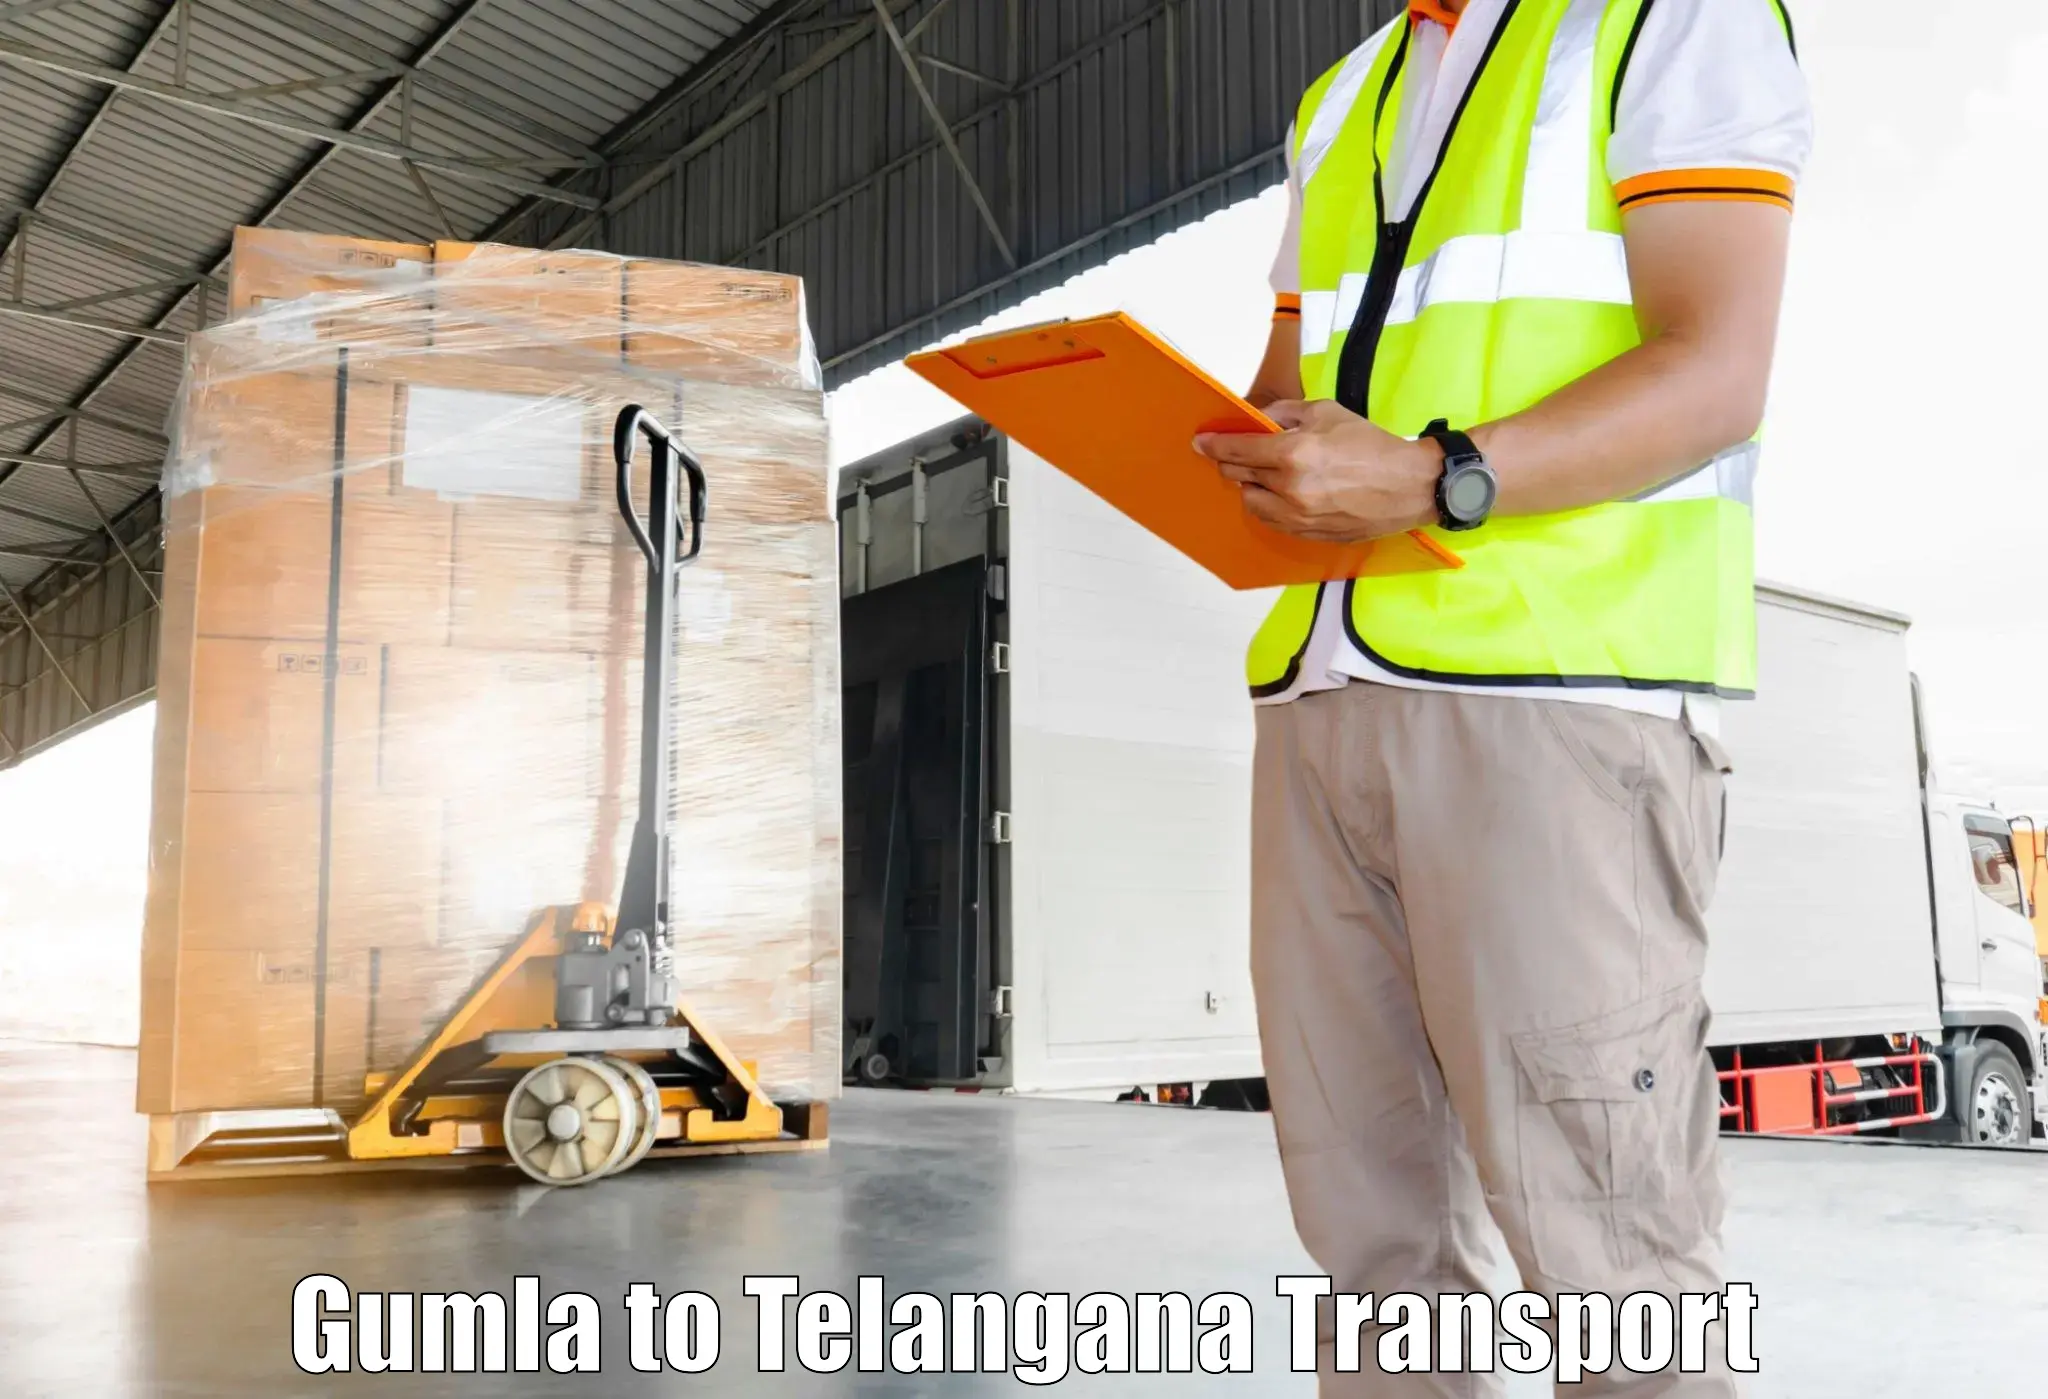 Transport bike from one state to another Gumla to Vemulawada